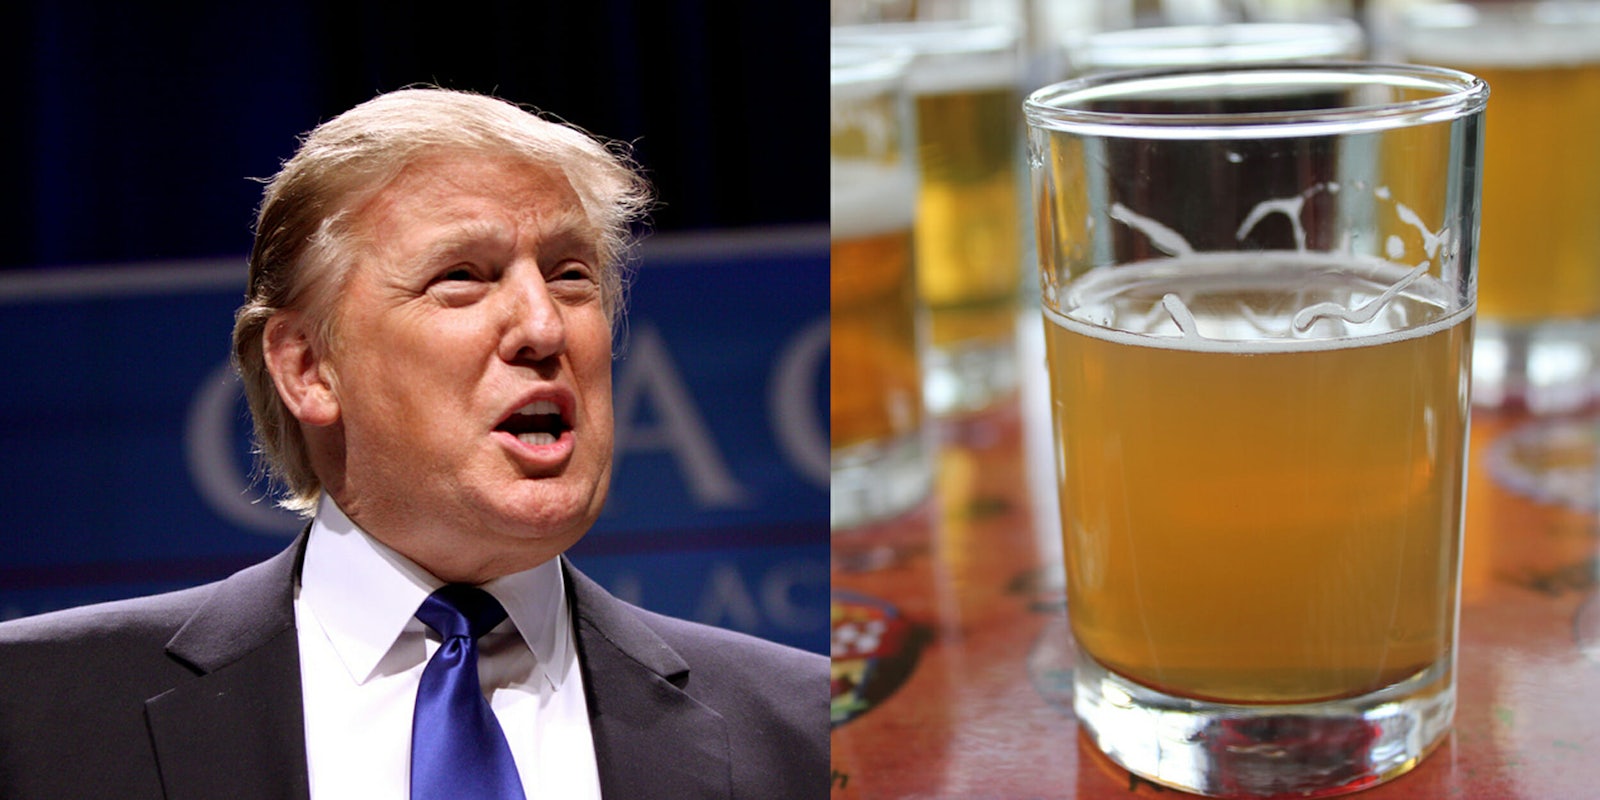 Donald Trump and a glass of beer.